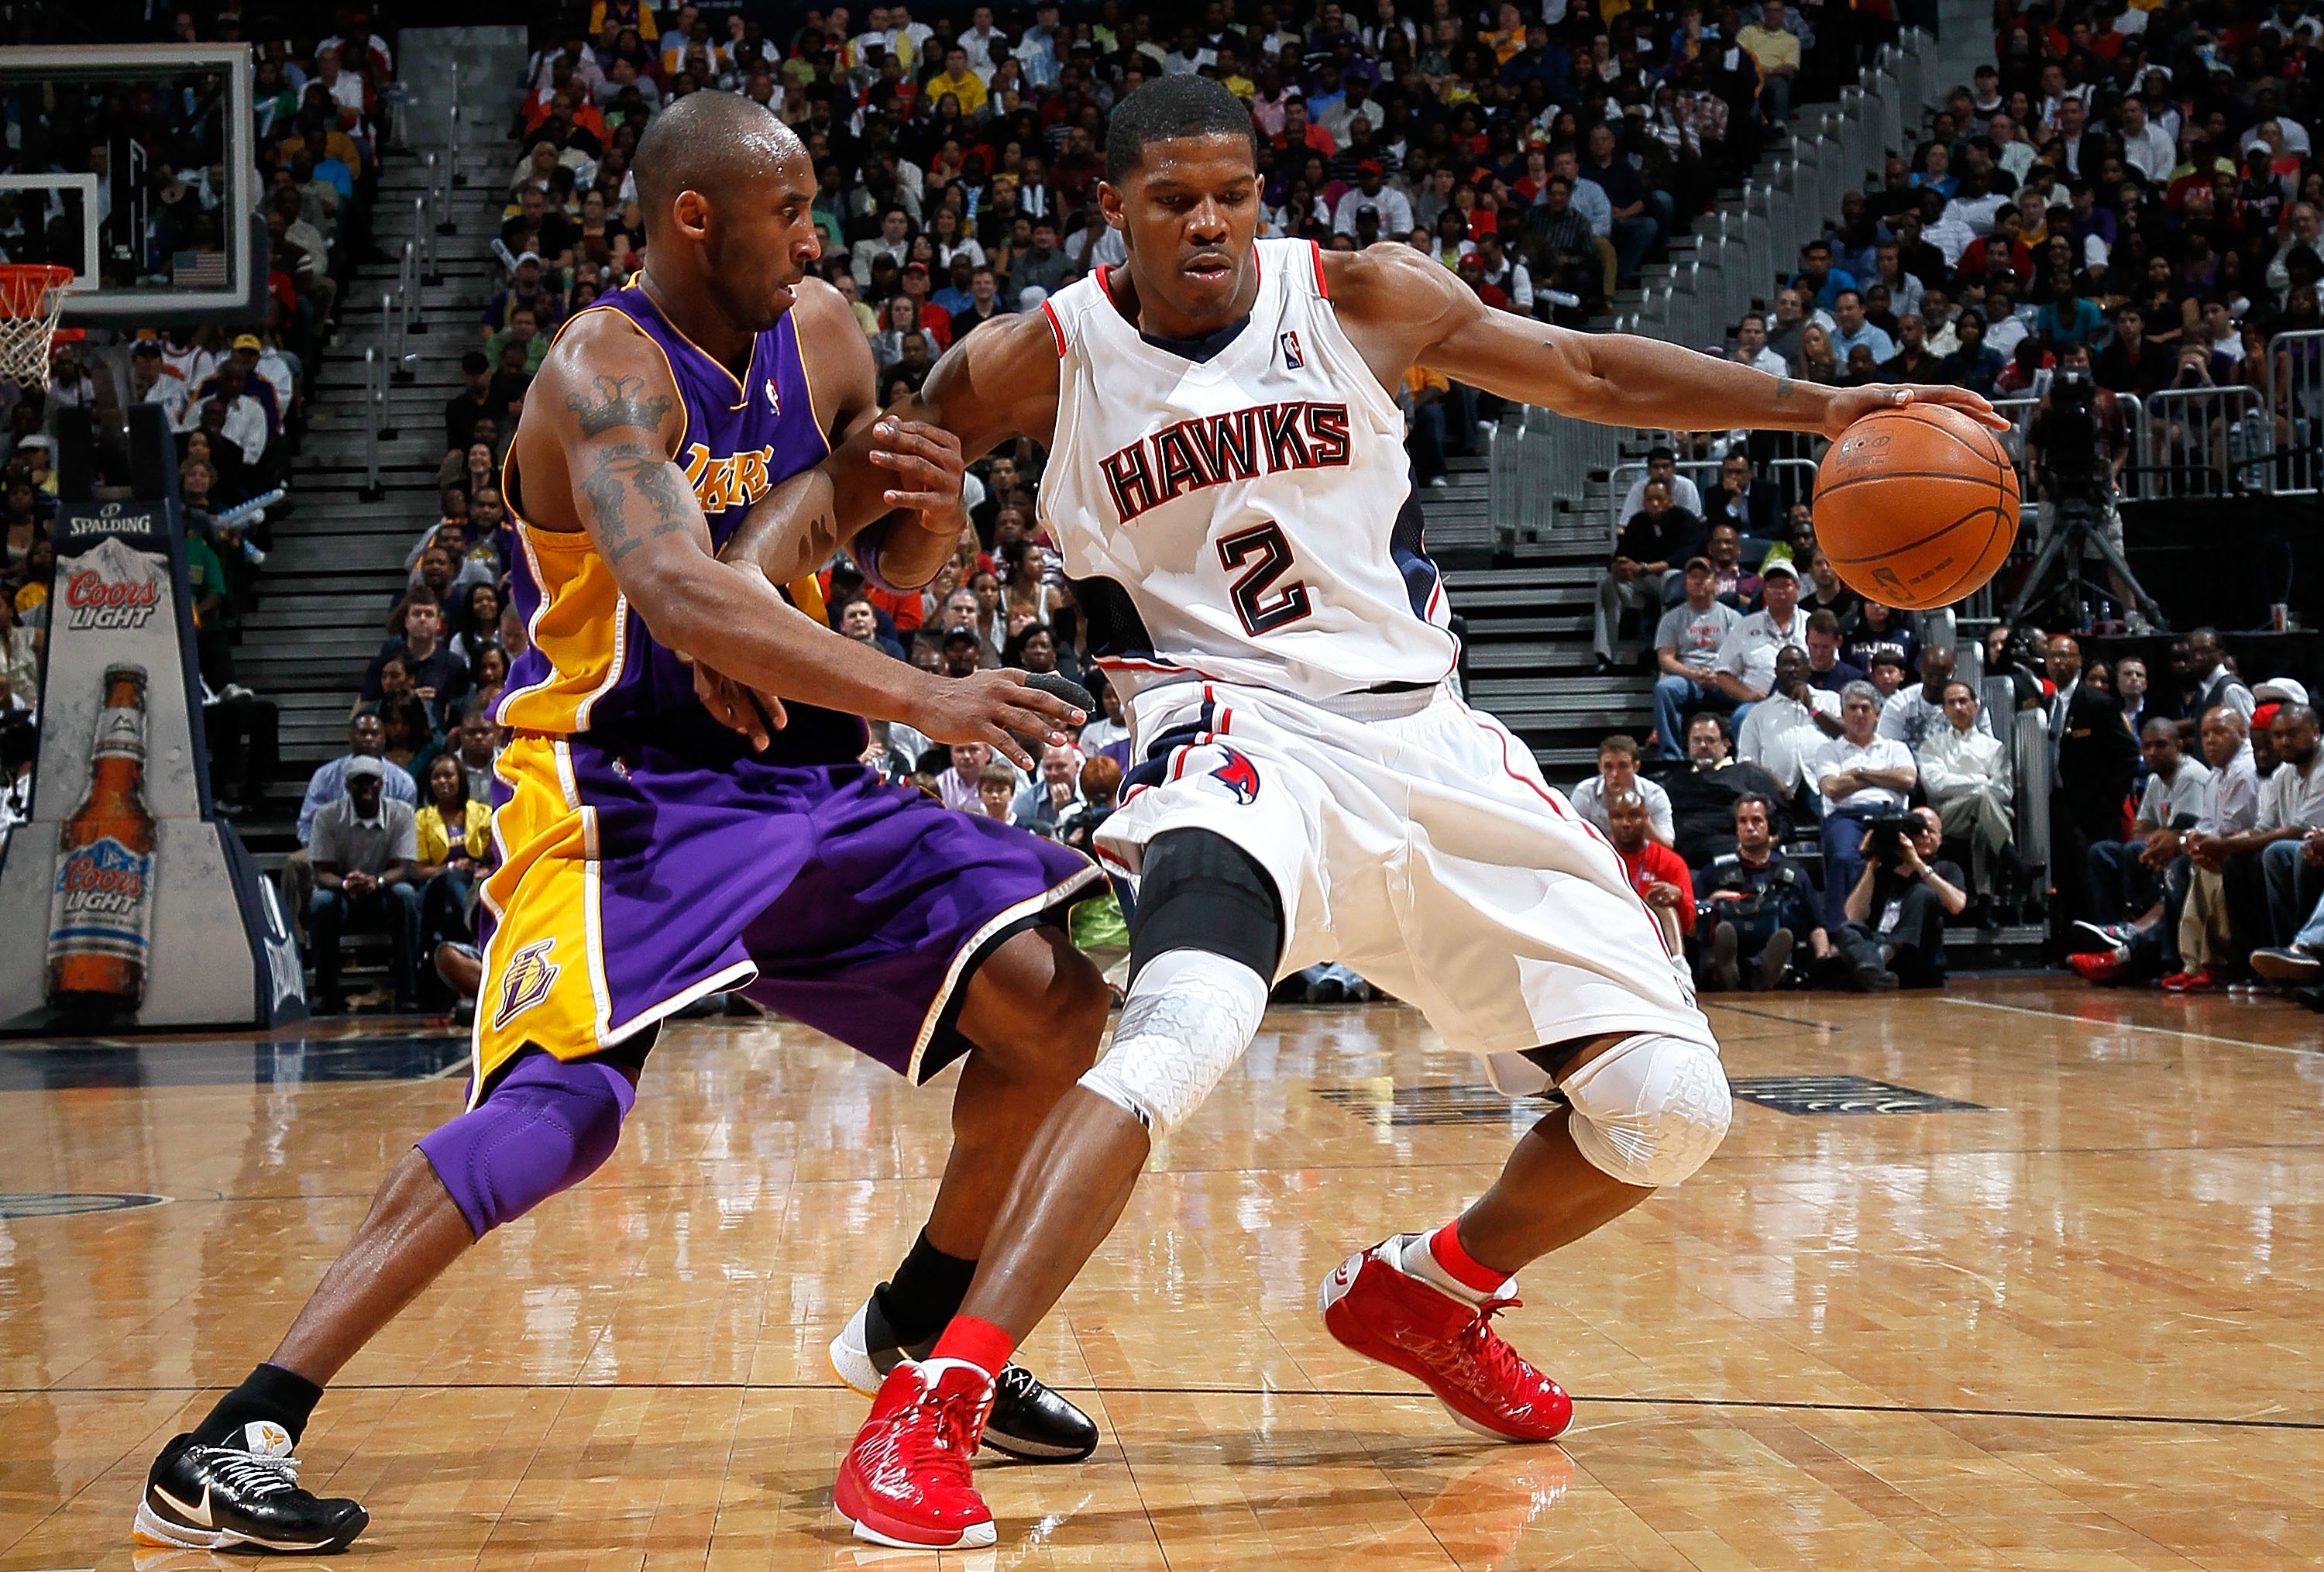 ATLANTA - MARCH 31: Joe Johnson #2 of the Atlanta Hawks drives against Kobe Bryant #24 of the Los Angeles Lakers at Philips Arena on March 31, 2010 in Atlanta, Georgia. NOTE TO USER: User expressly acknowledges and agrees that, by downloading and/or using this Photograph, User is consenting to the terms and conditions of the Getty Images License Agreement. (Photo by Kevin C. Cox/Getty Images)